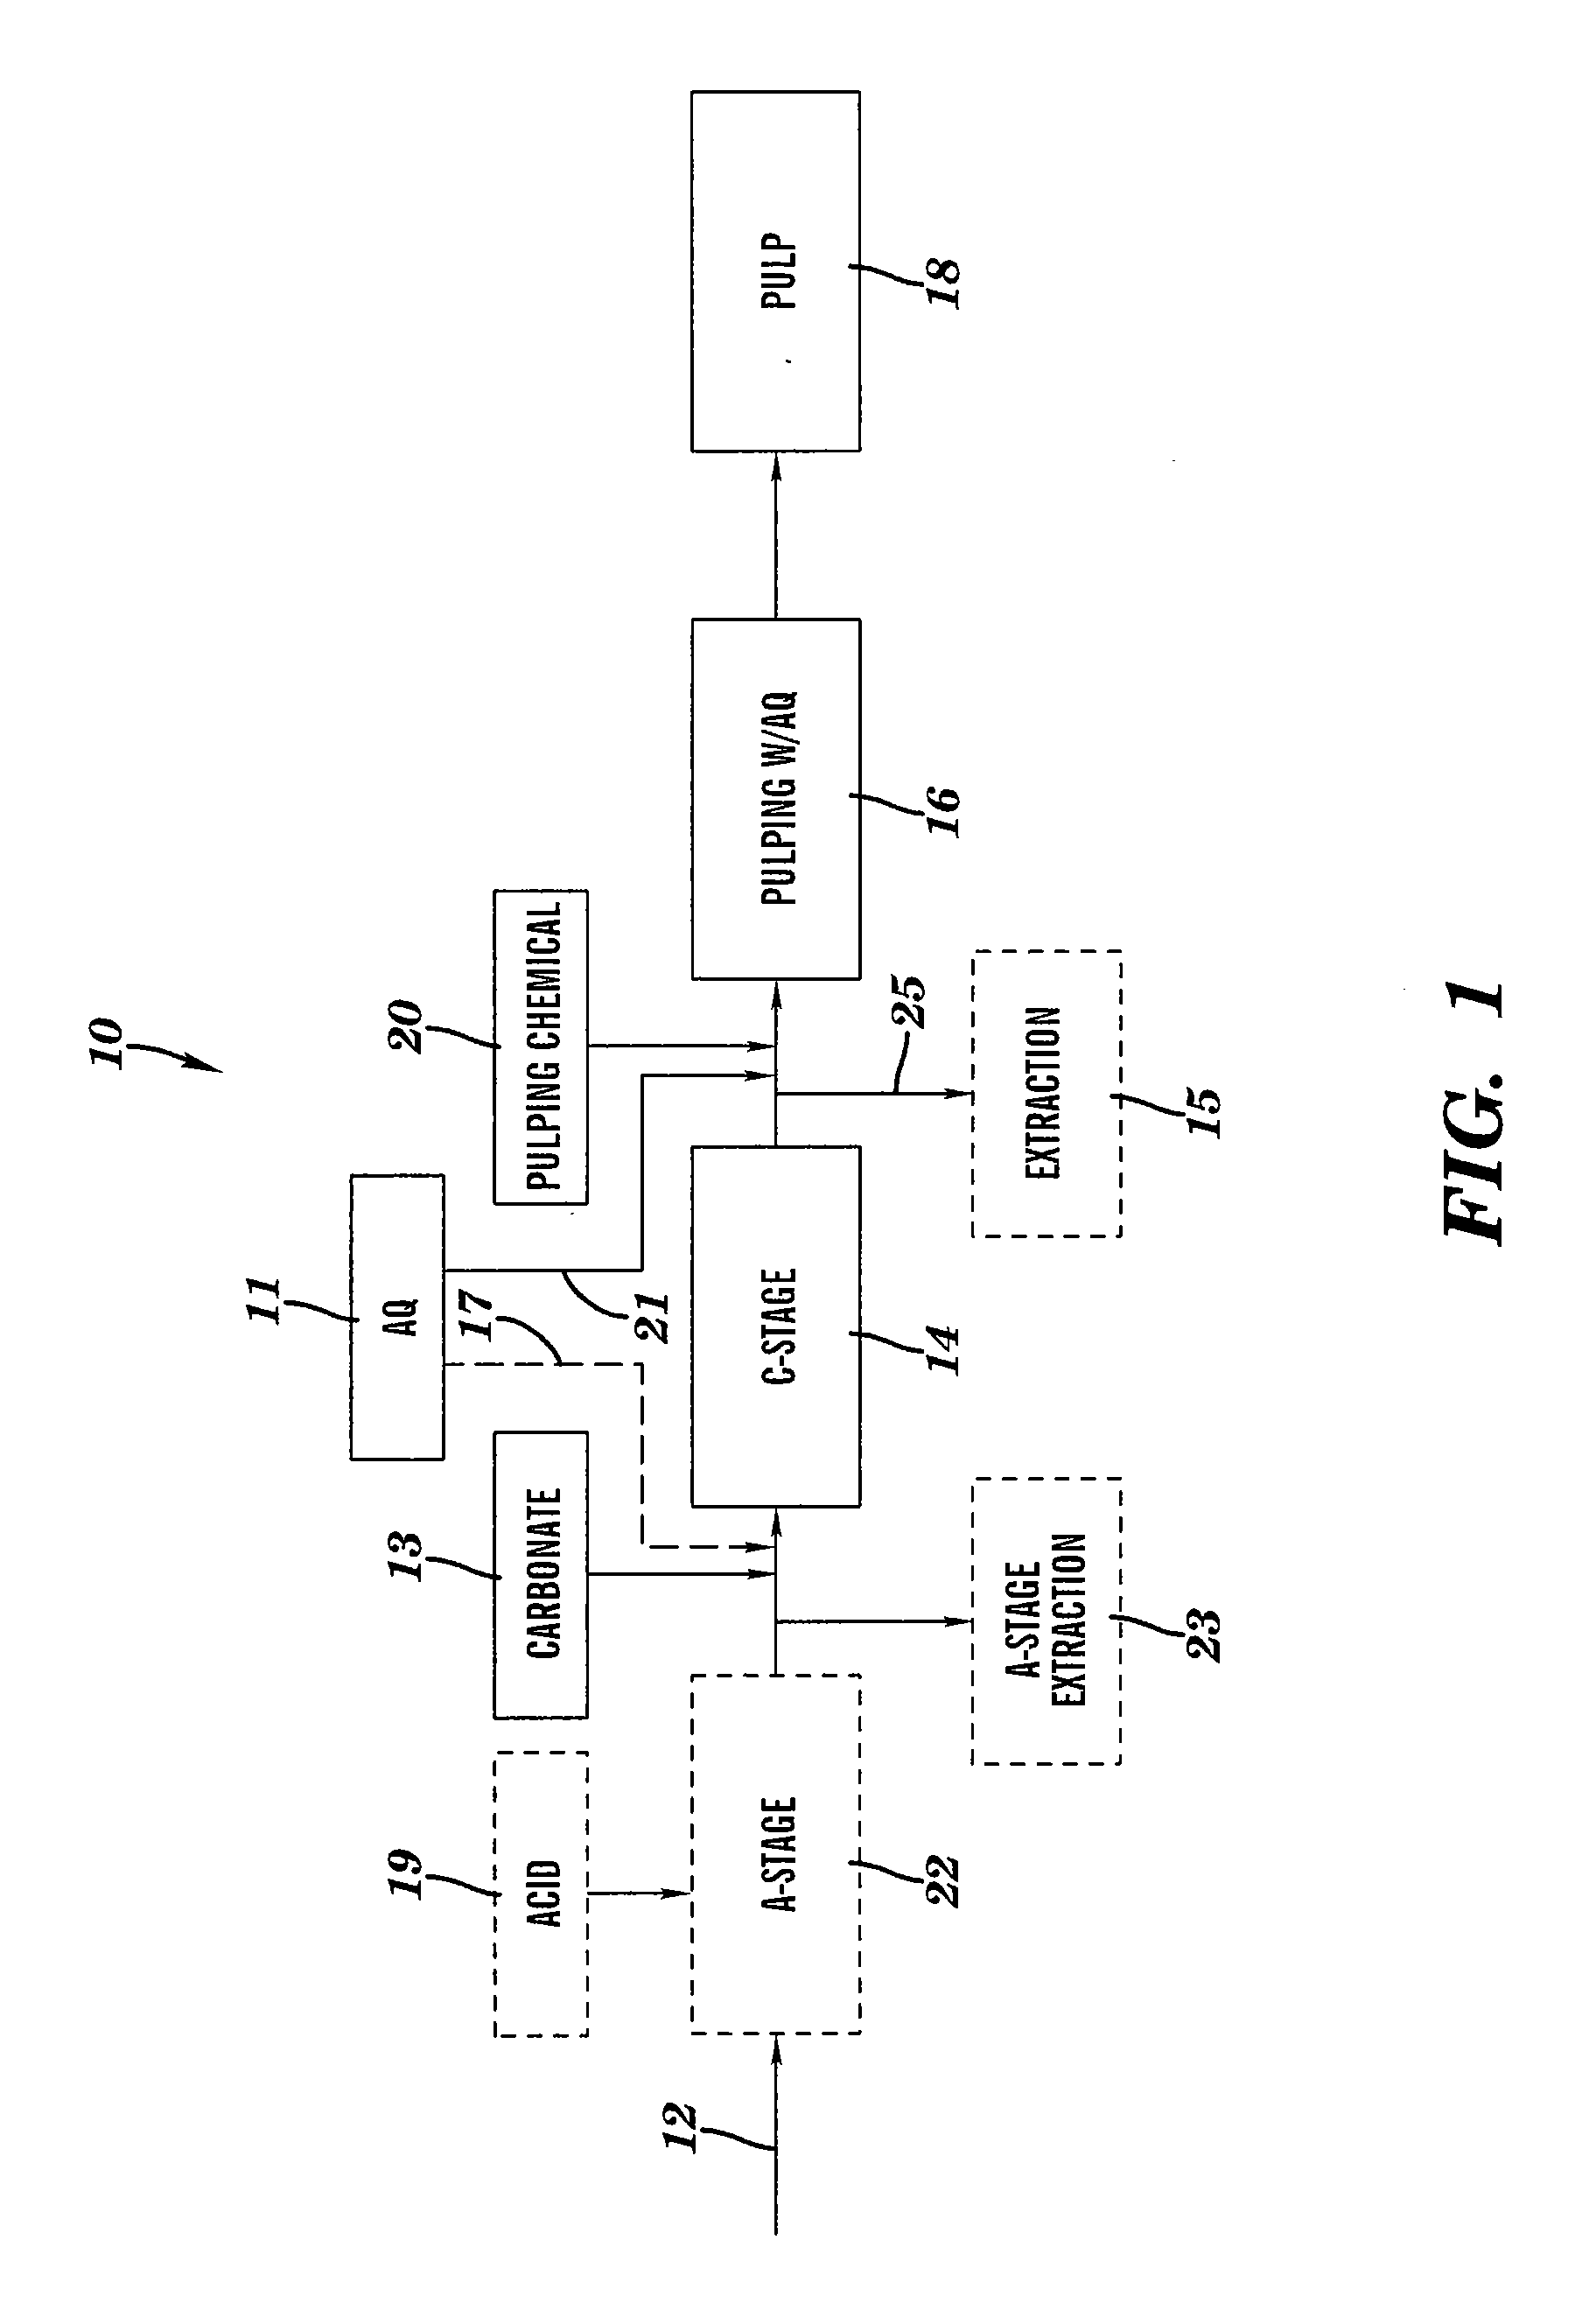 Methods for carbonate pretreatment and pulping of cellulosic material